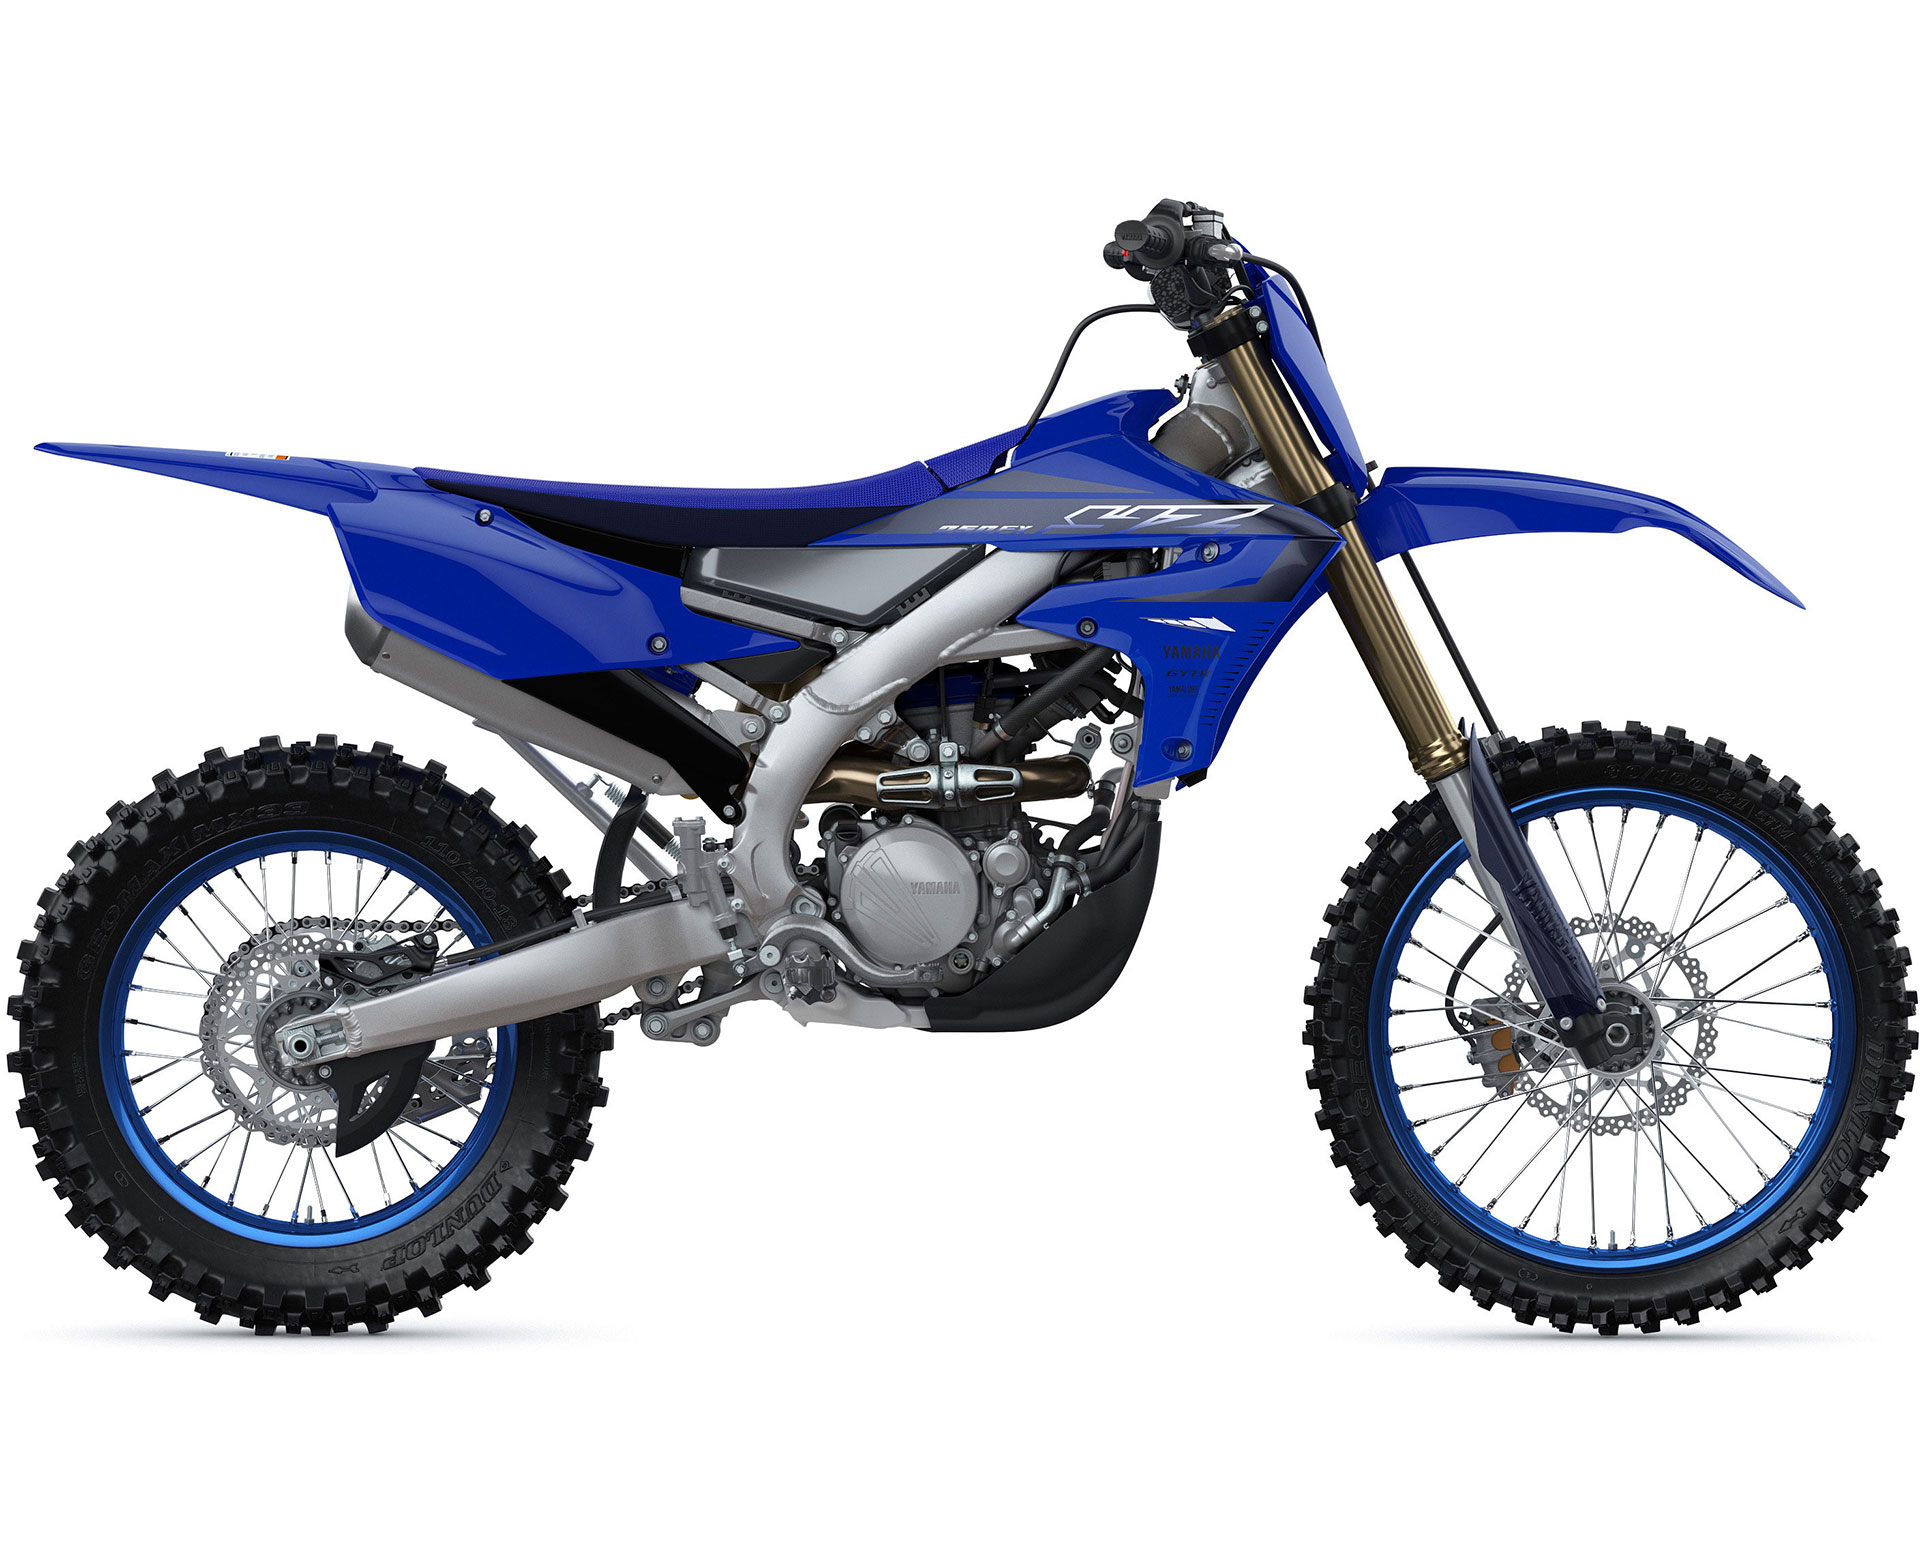 Thumbnail of your customized 2023 YZ250FX